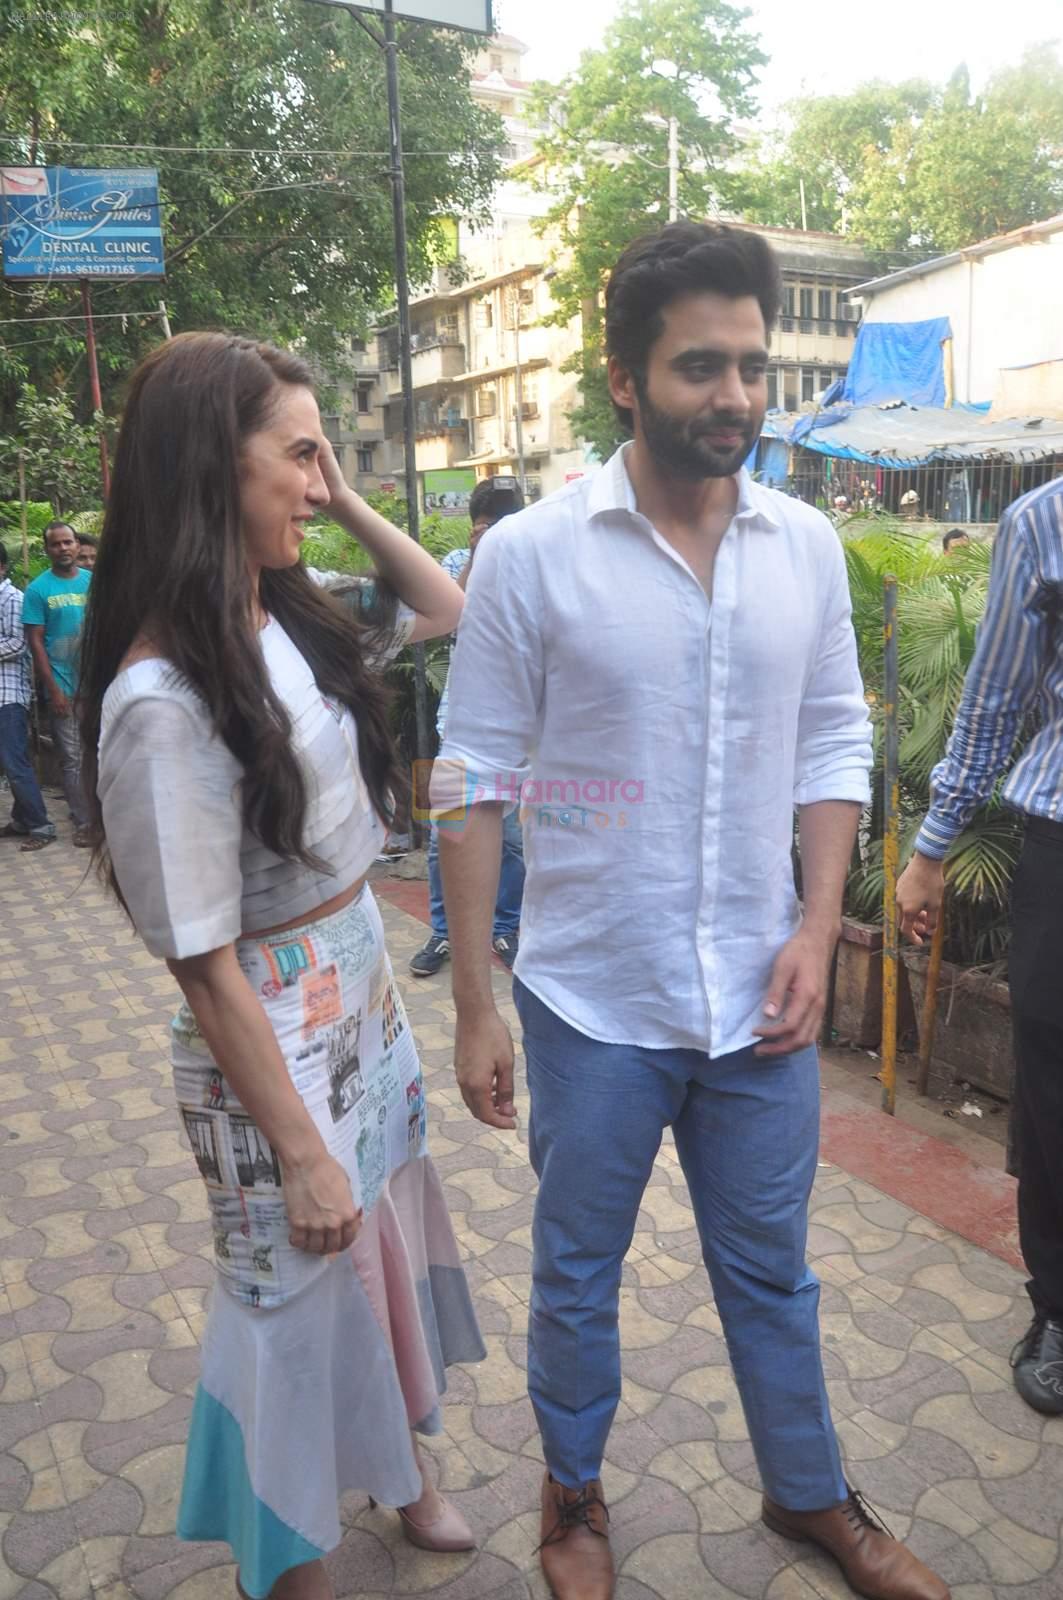 Jackky Bhagnani, Lauren Gottlieb at Welcome to Karachi promotions in Karachi Sweets, Bandra on 15th May 2015